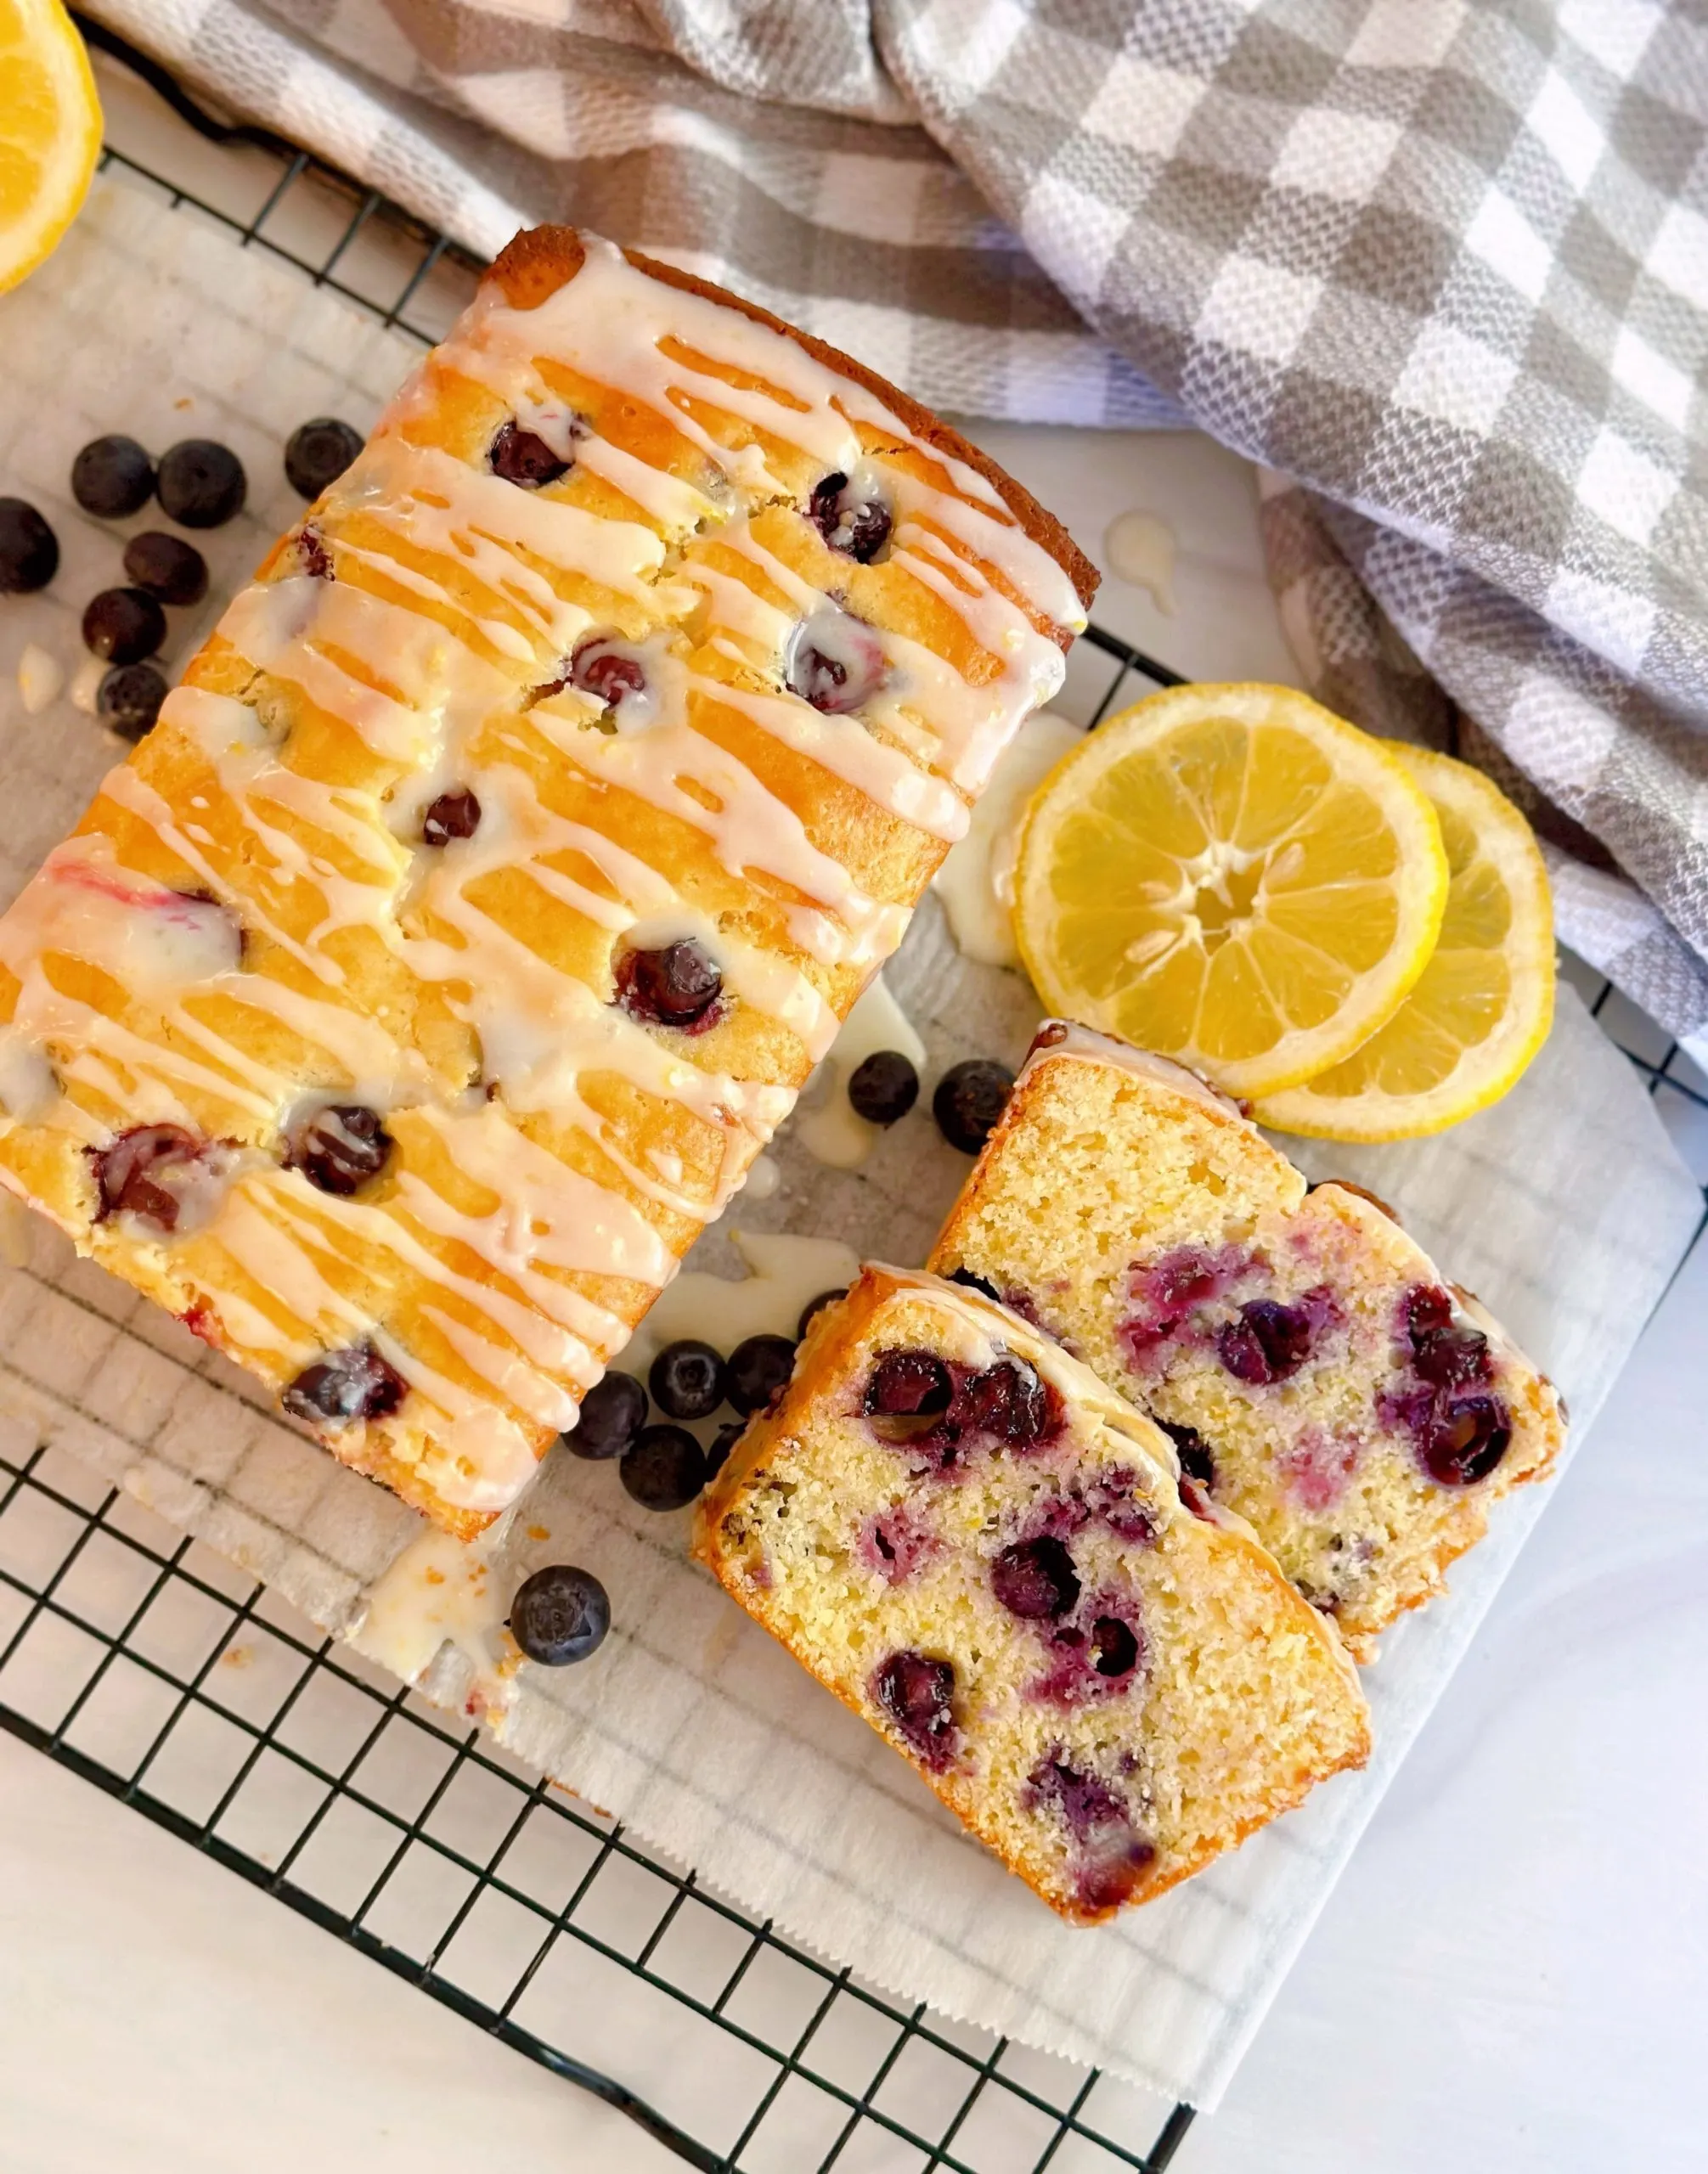 Lemon Blueberry Glazed Bread on a cooling rack with parchment paper and fresh blueberries. Sliced.